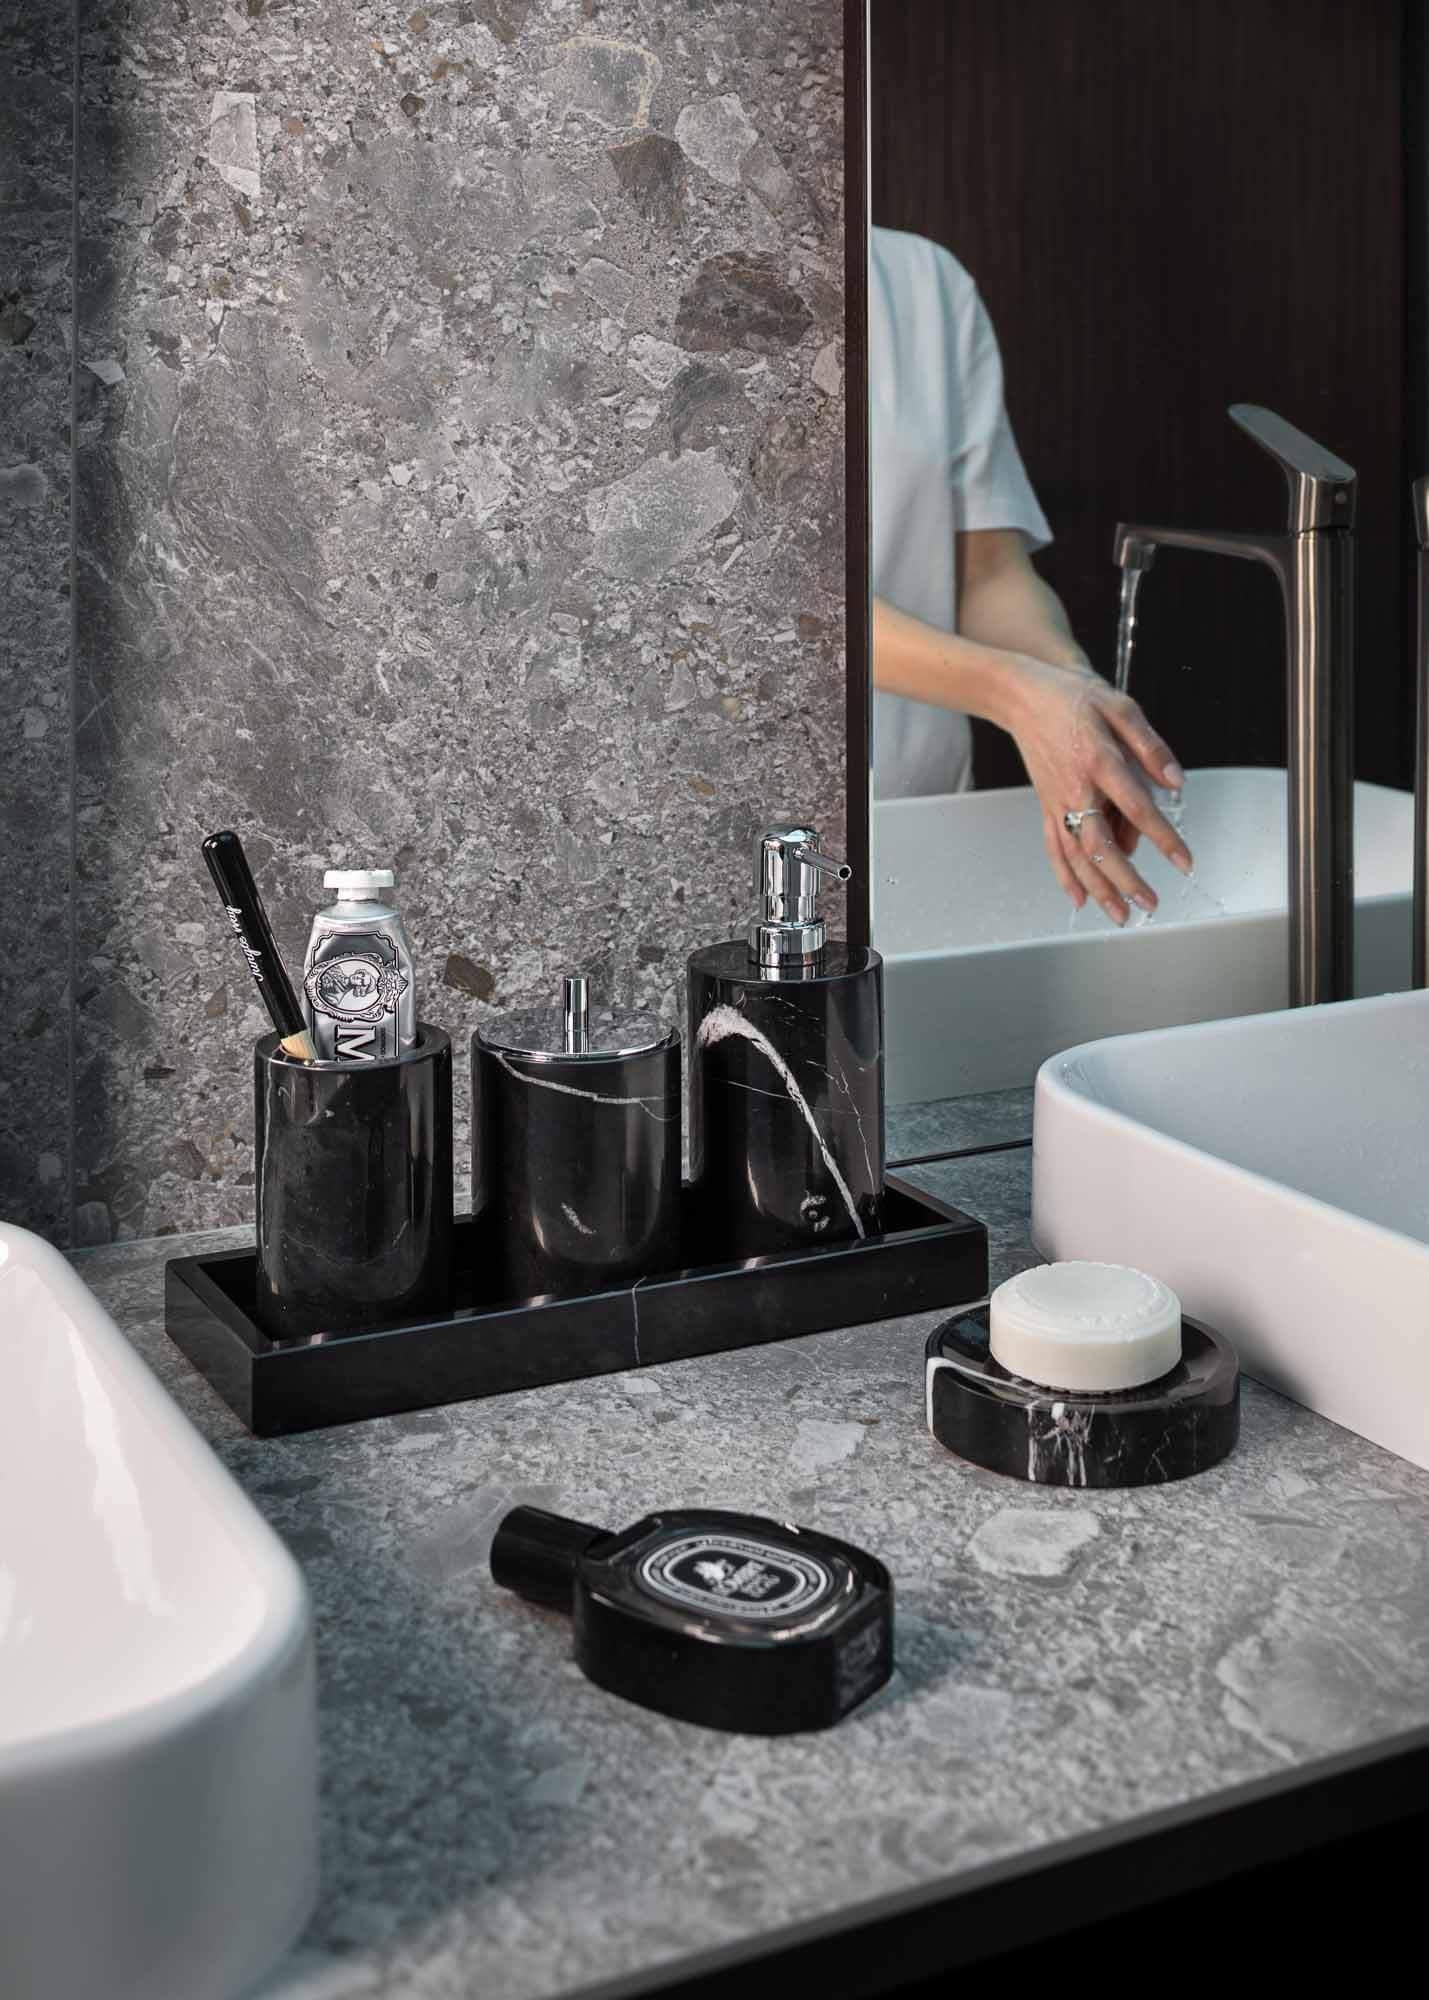 Crafted from elegant Black Marquina marble, this deluxe bathroom set is designed to enhance both the beauty and functionality of your bathroom, spa, or hotel.

The bathroom set contains a rectangular tray, soap dispenser, soap dish, toothbrush